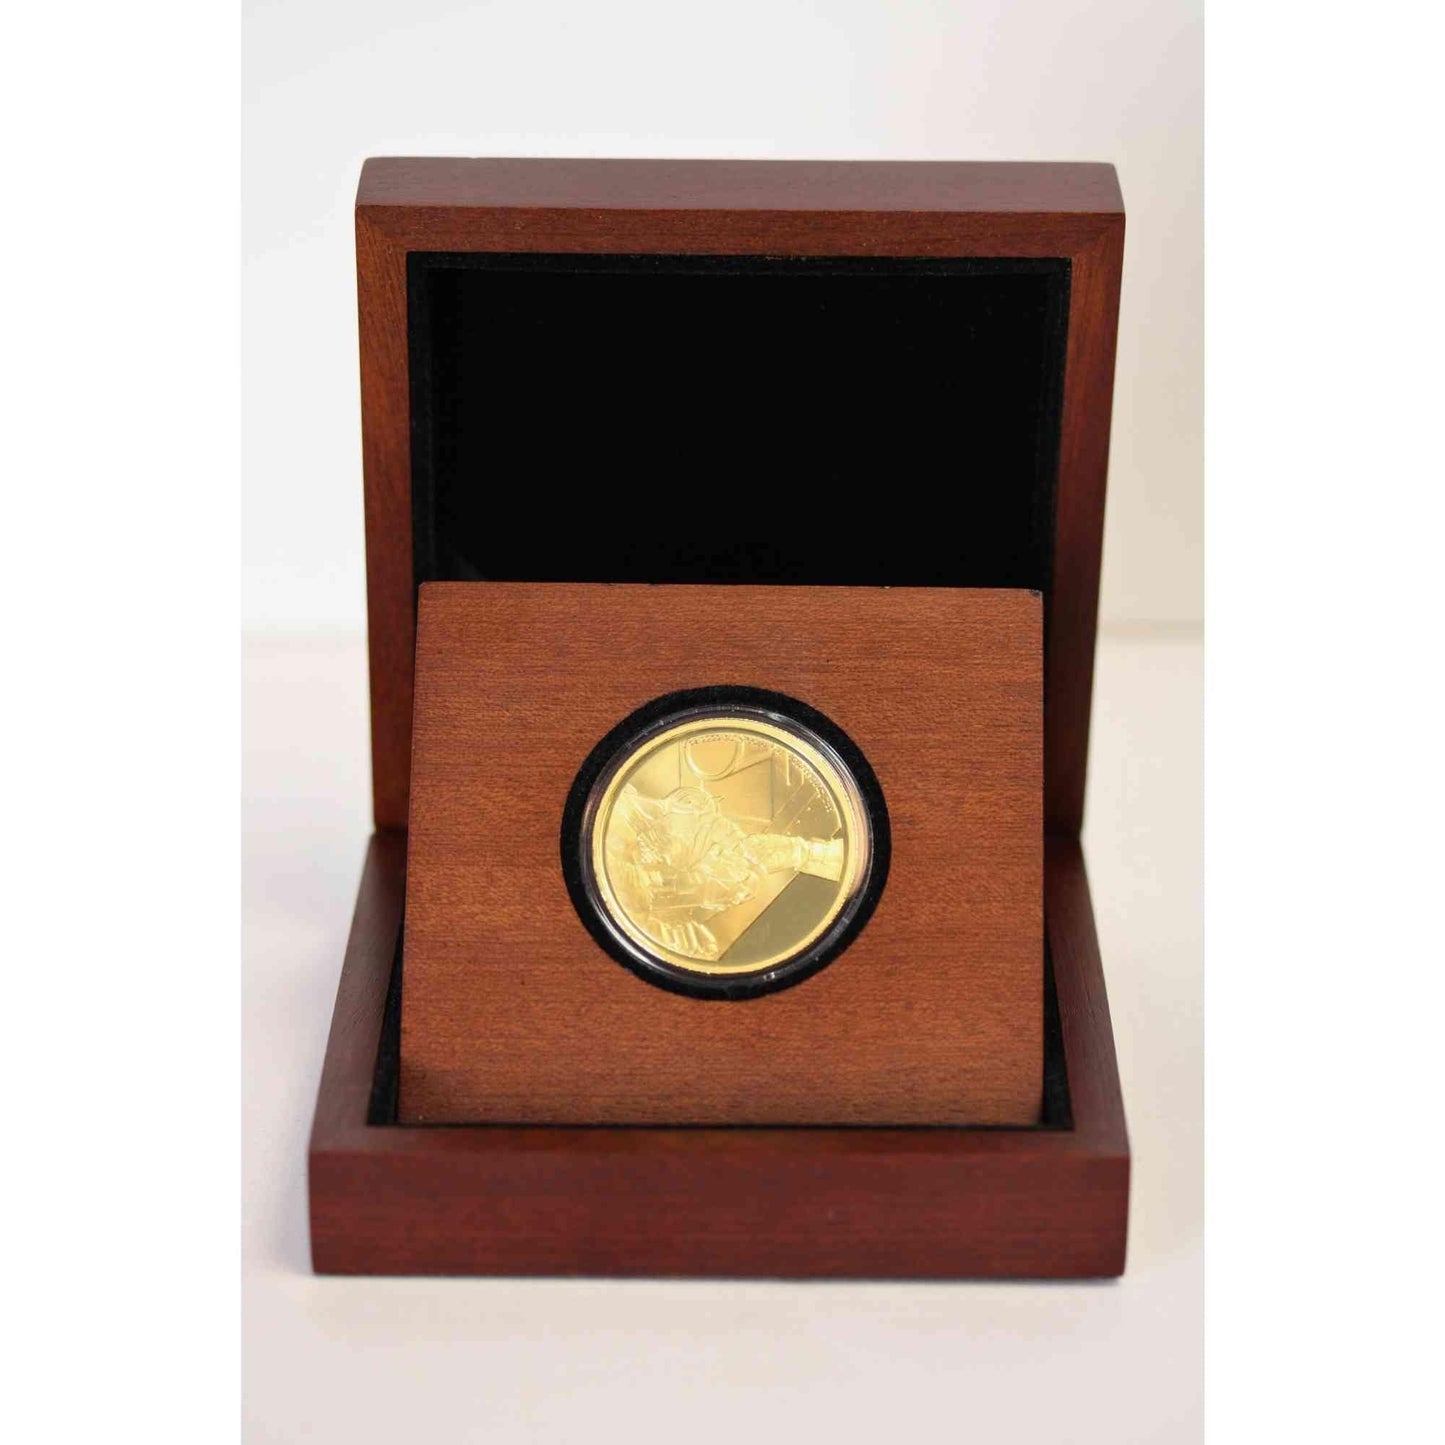 2022 Grogu 1 oz Limited Edition Gold Coin